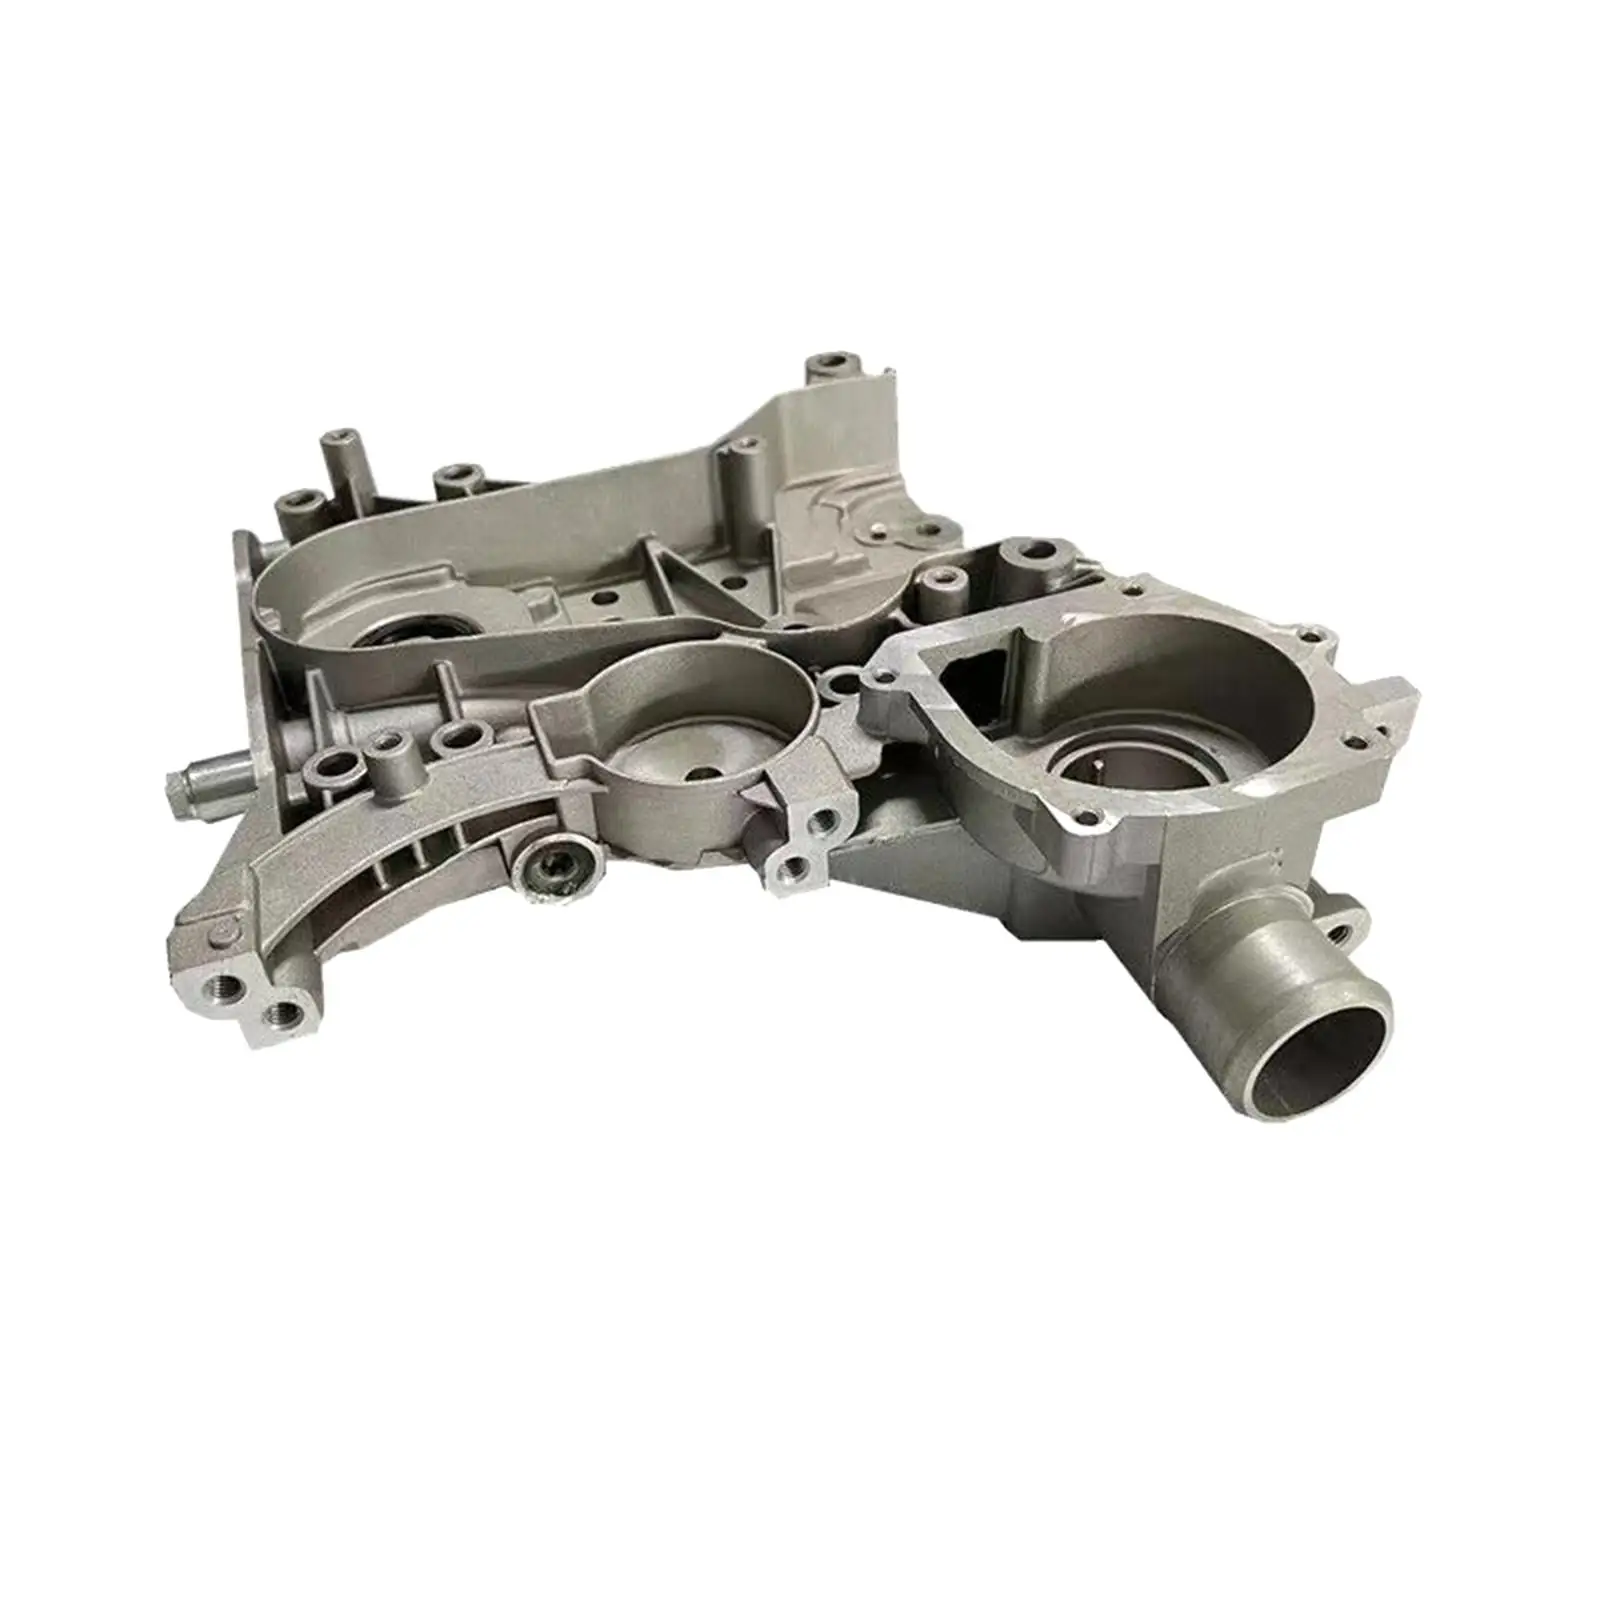 Timing Chain Oil Pump Cover 55556428 25190865 Assembly for Opel ASTRA Automobile Repairing Accessory Stable Performance